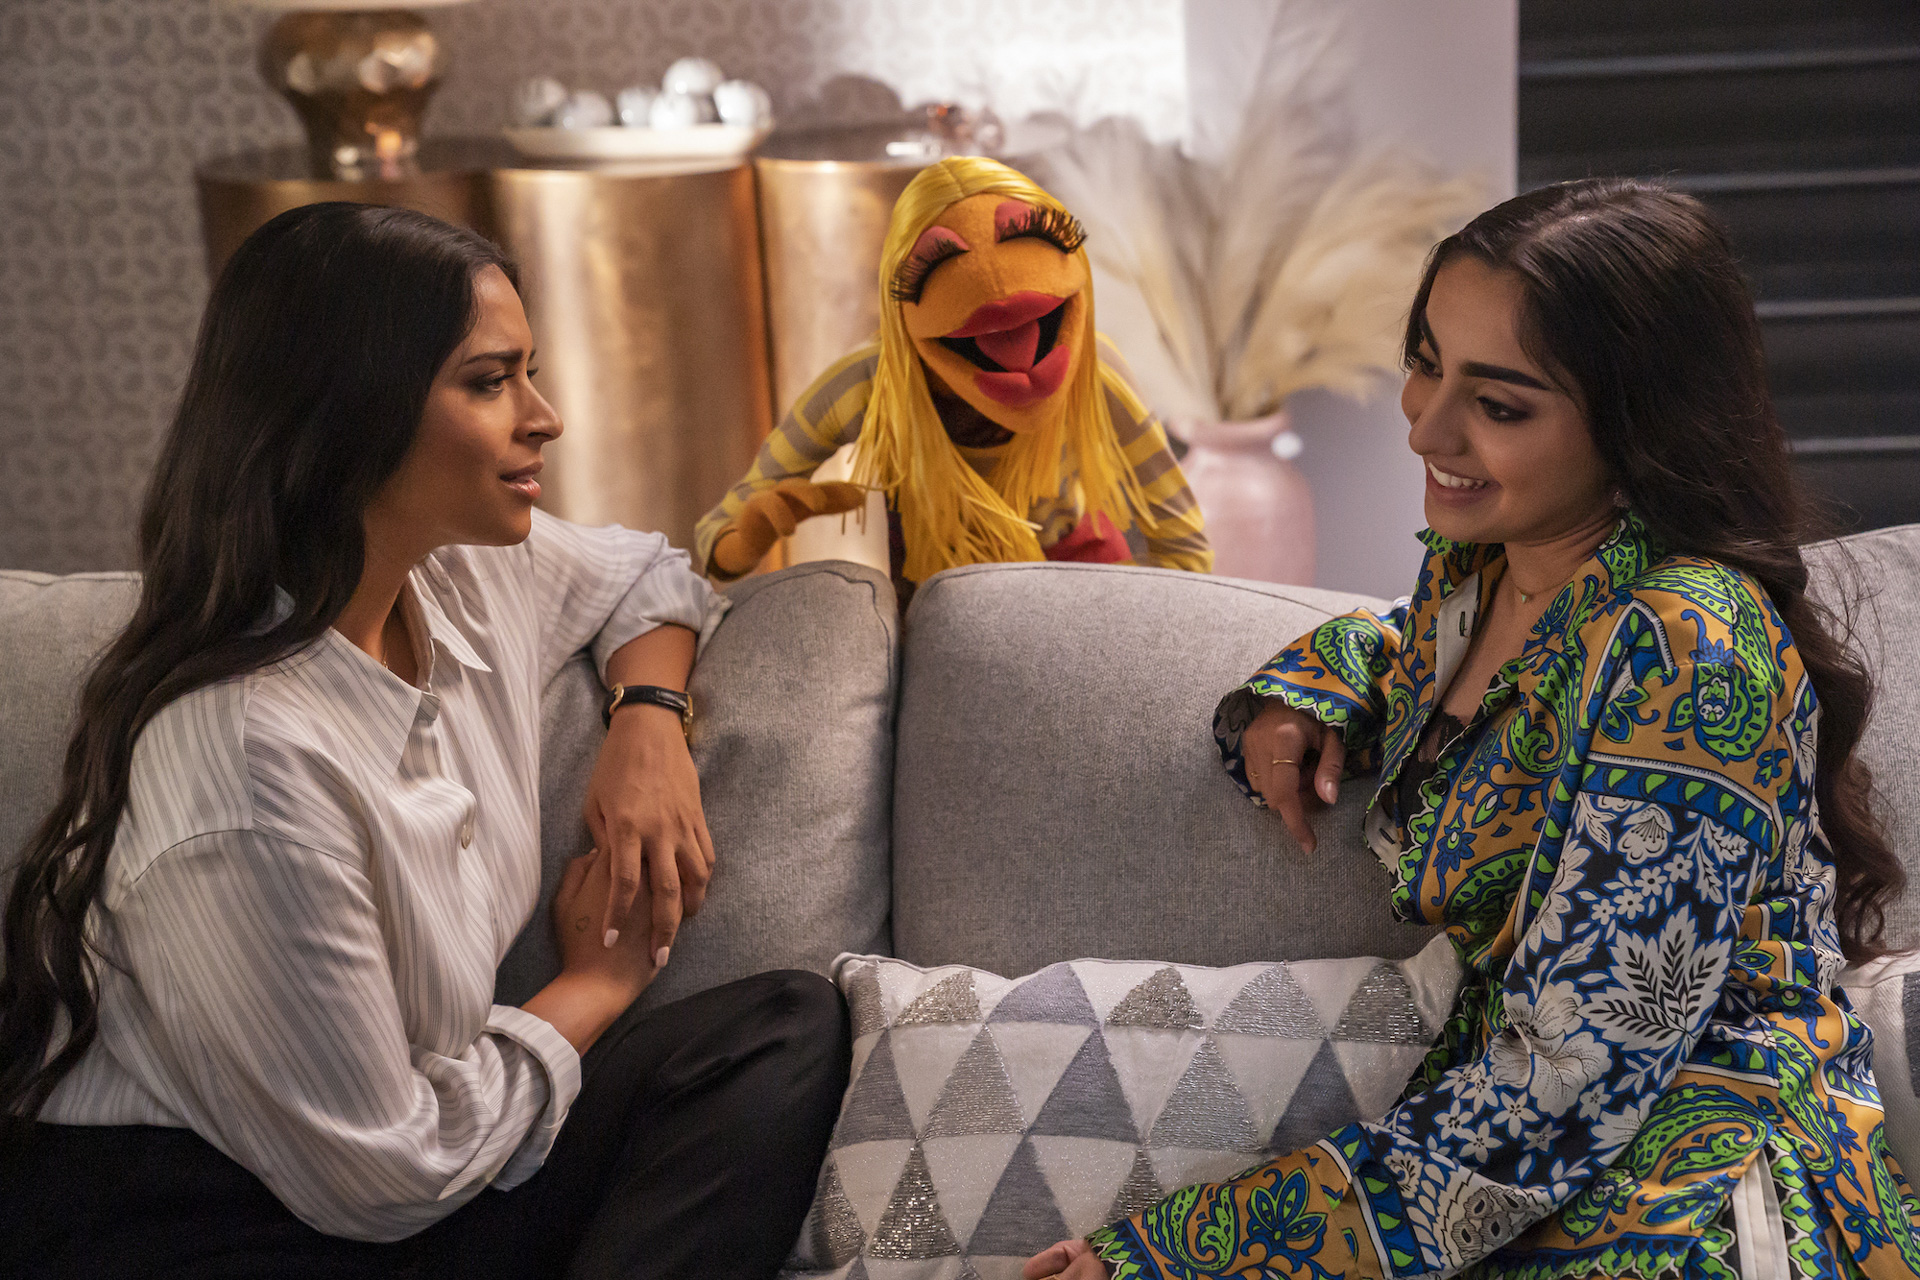 In a scene from The Muppets Mayhem, actors Lilly Singh and Saara Chaudry sit on a couch and chat with Janice.